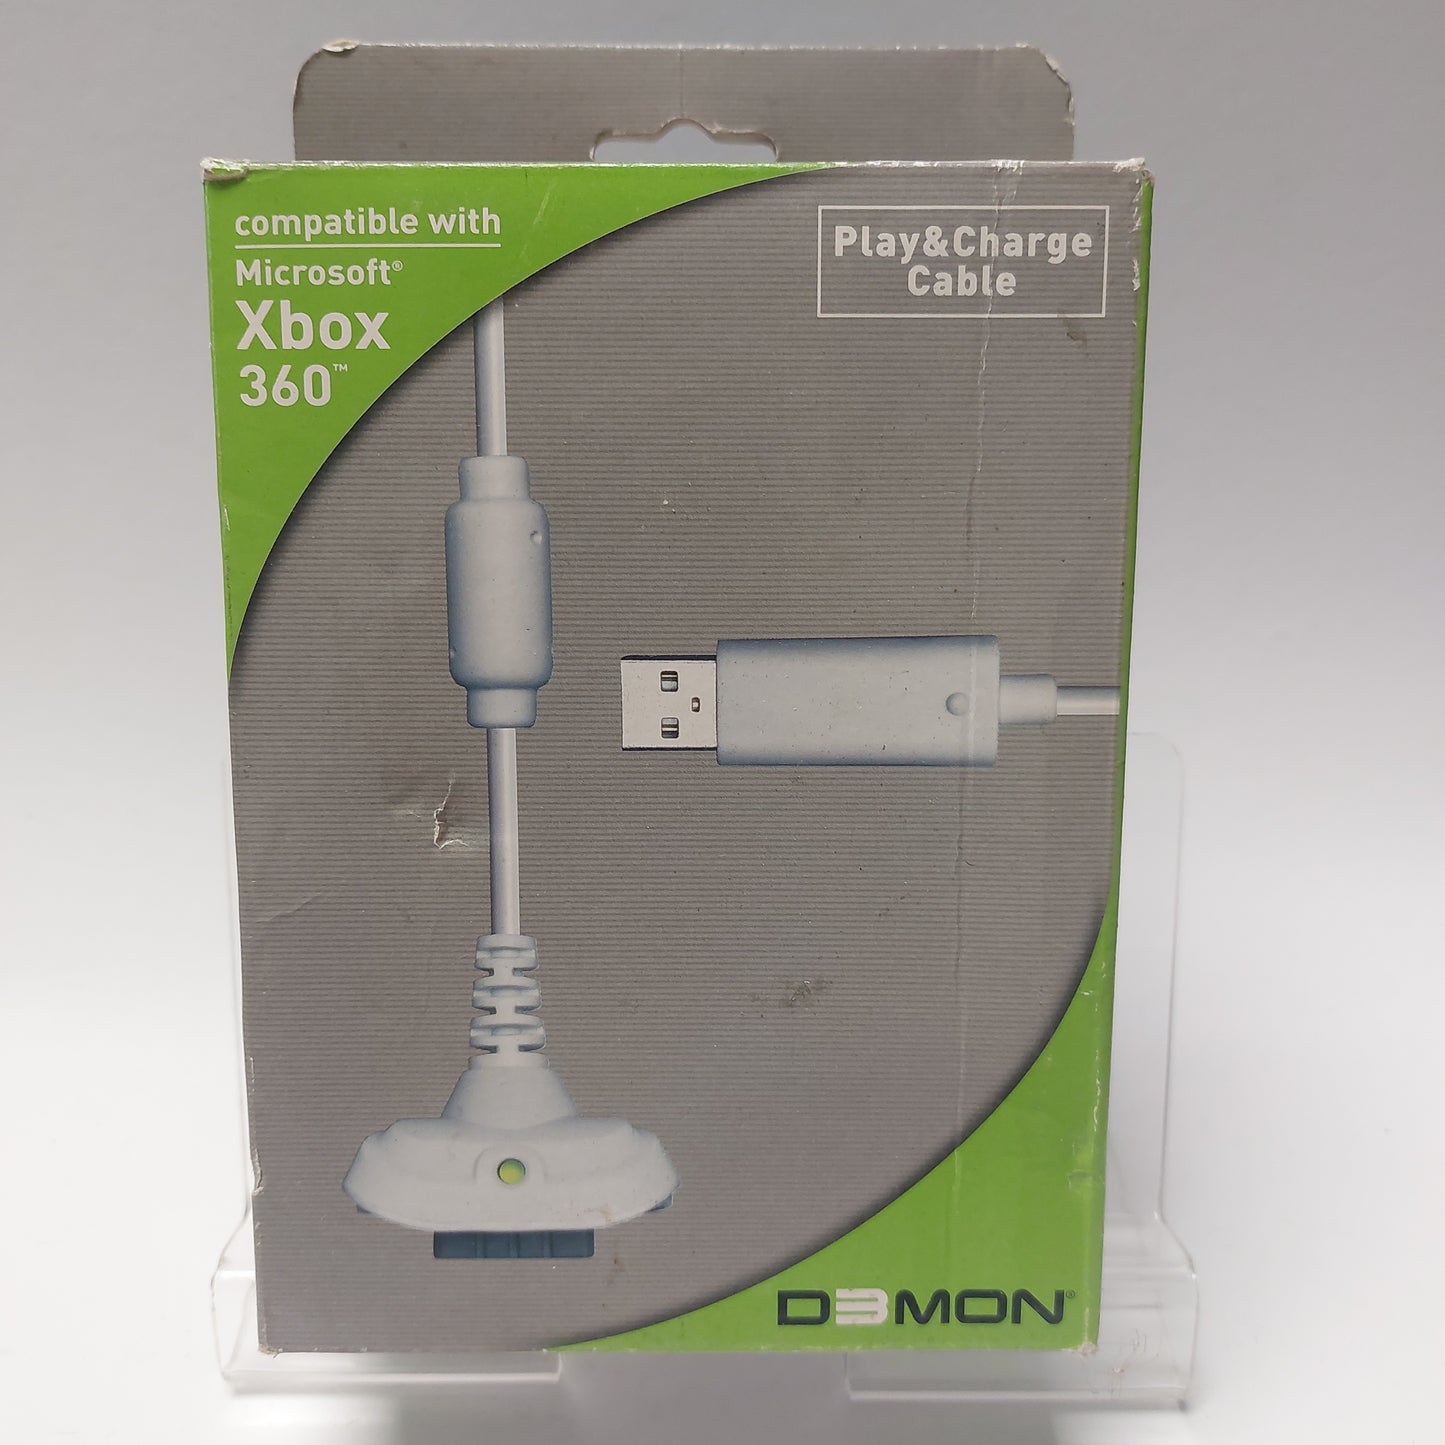 Compatible With Microsoft Xbox 360 Play&Charge Cable